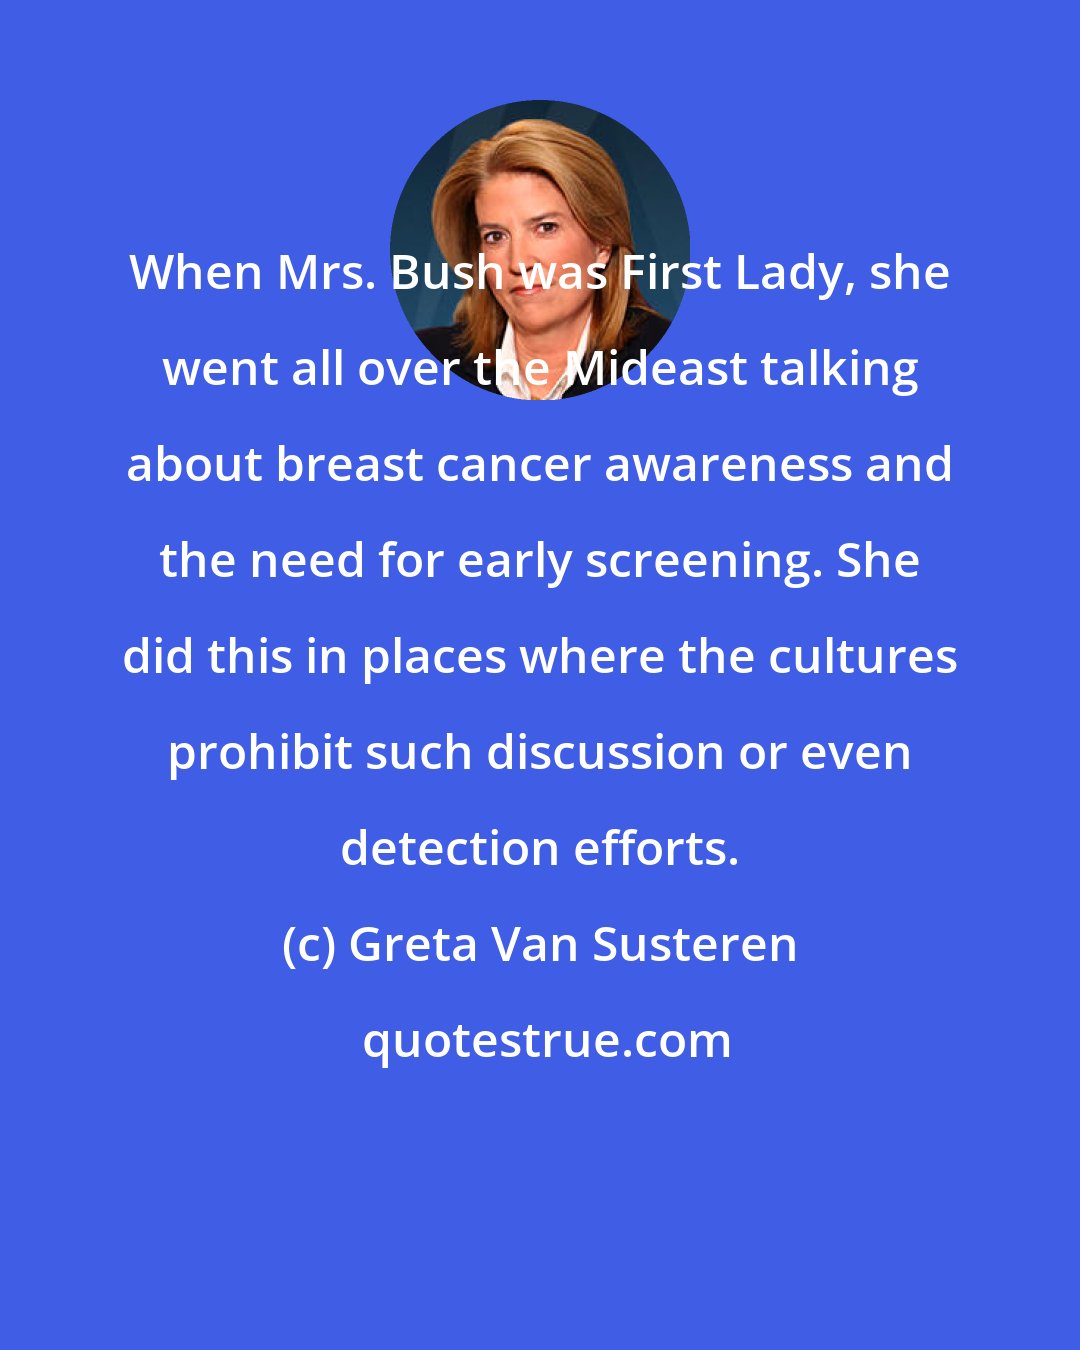 Greta Van Susteren: When Mrs. Bush was First Lady, she went all over the Mideast talking about breast cancer awareness and the need for early screening. She did this in places where the cultures prohibit such discussion or even detection efforts.